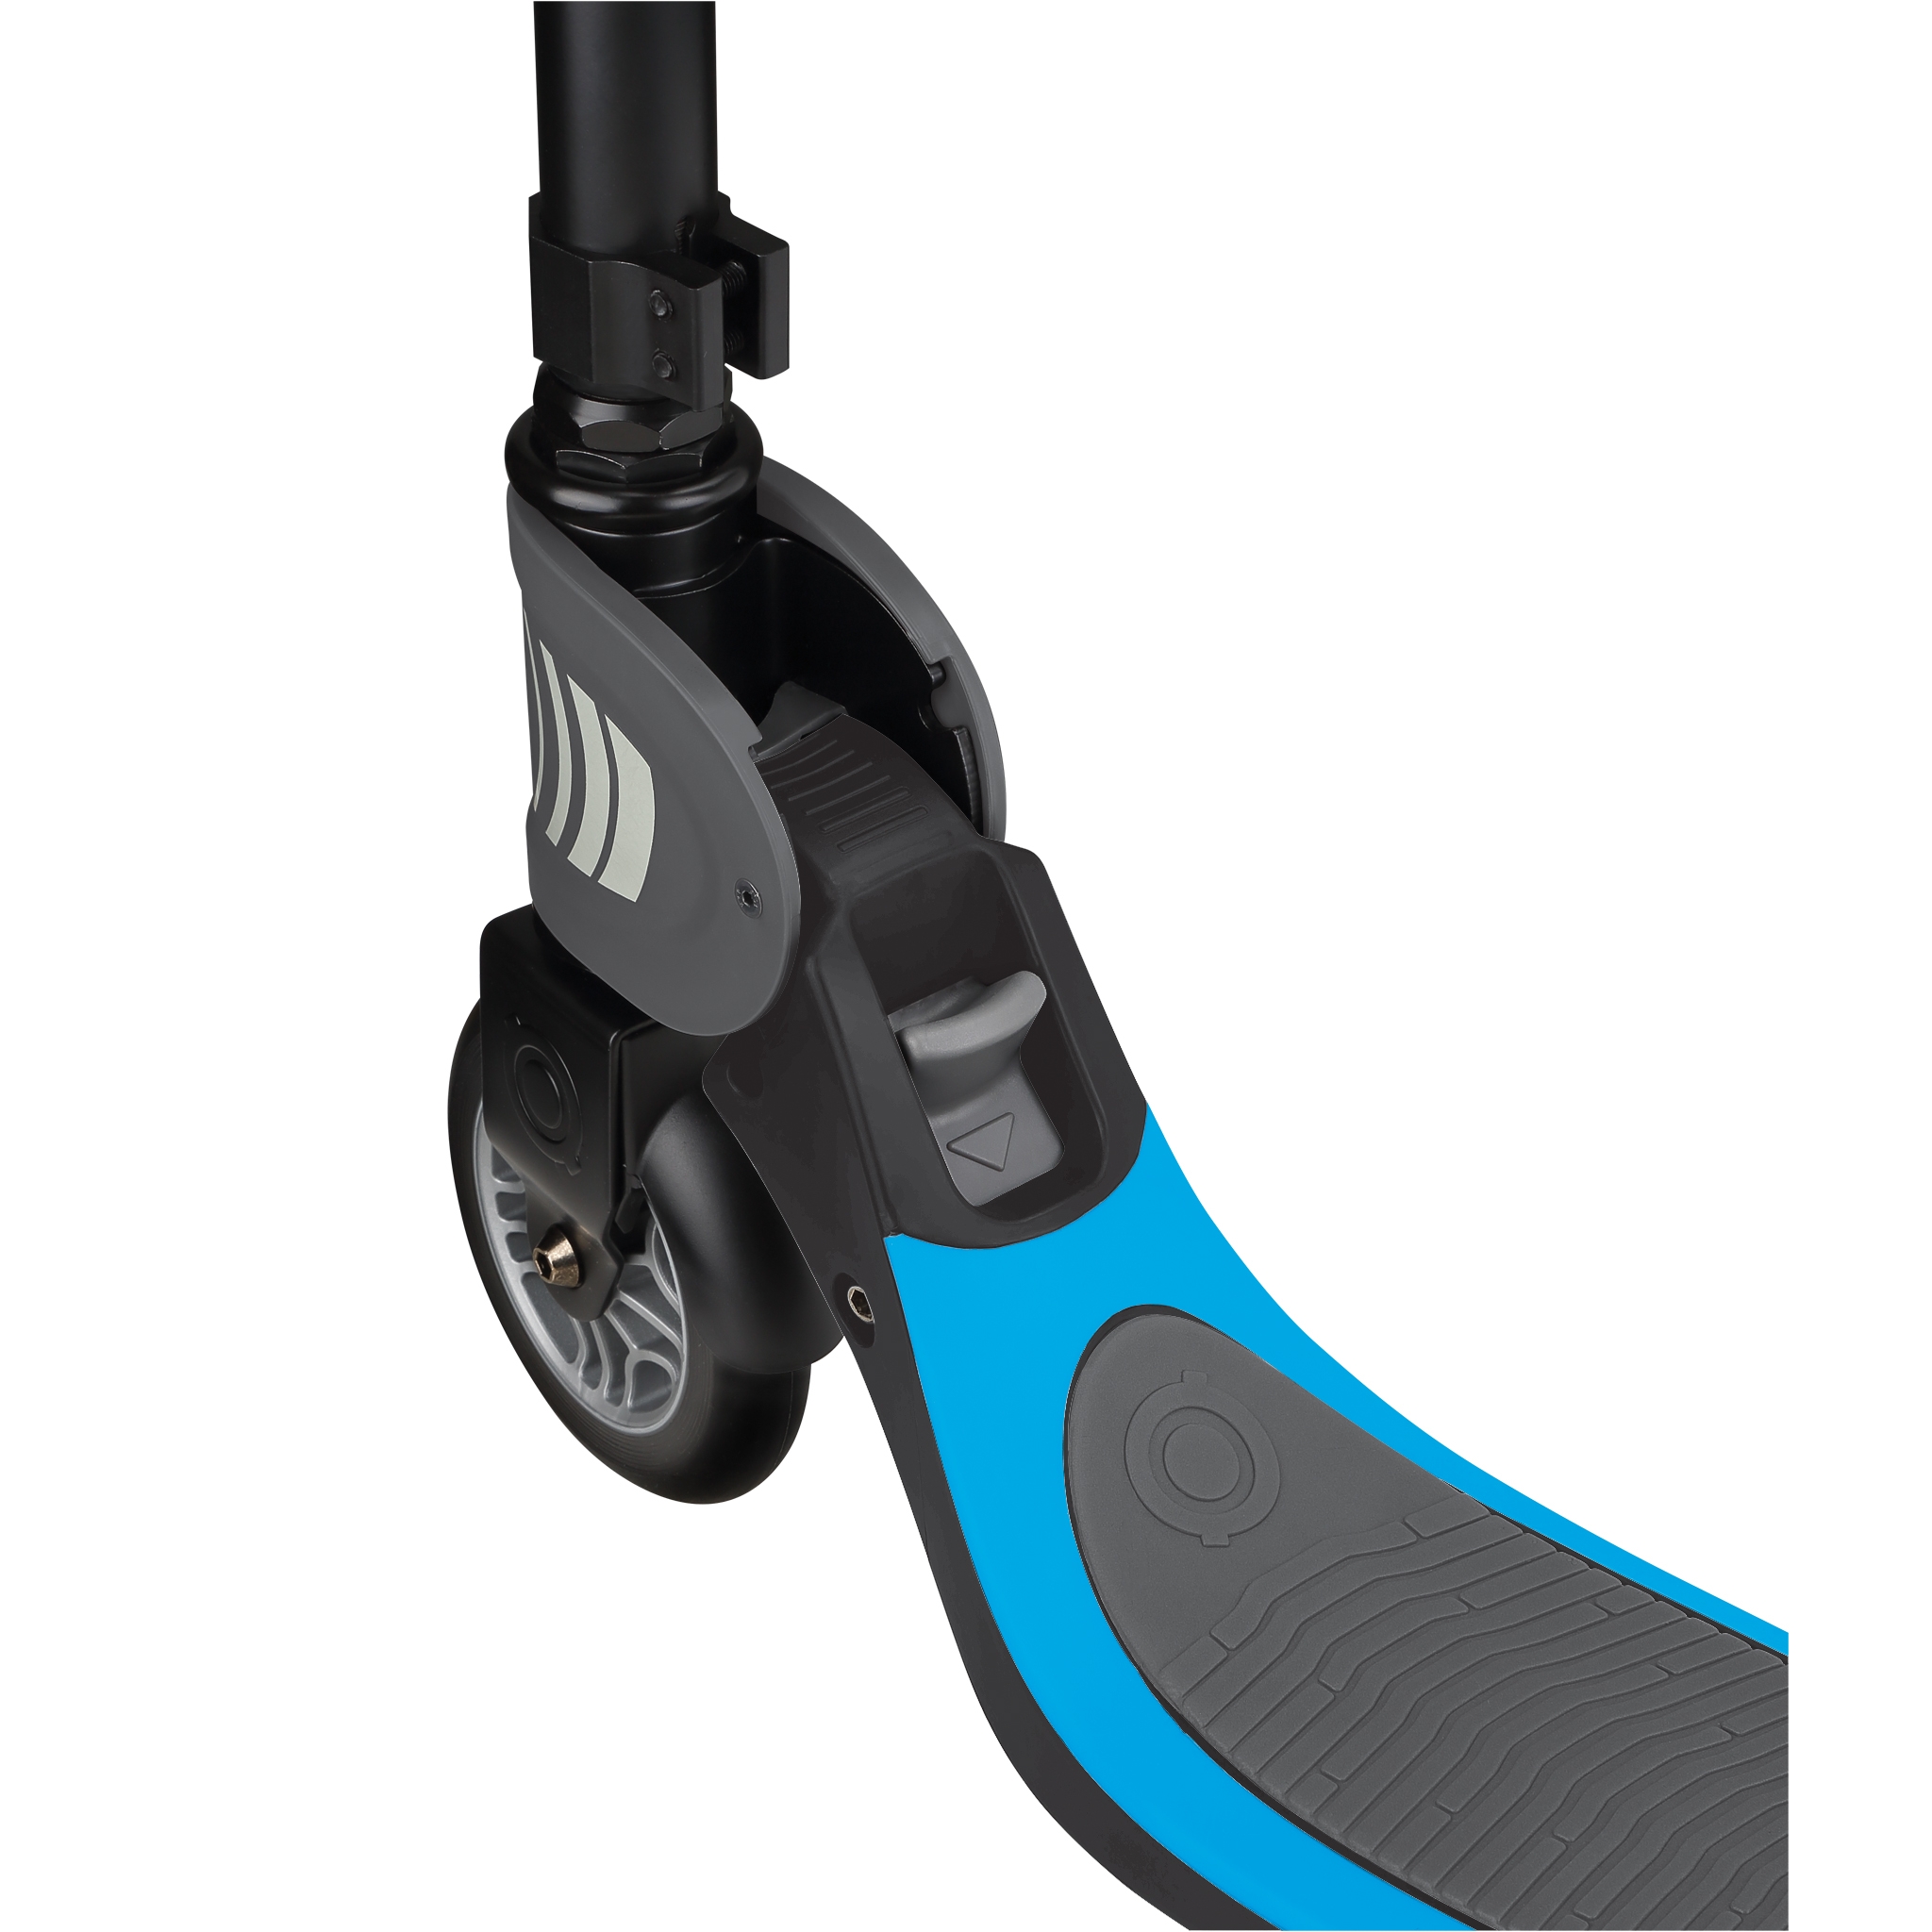 FLOW-FOLDABLE-125-2-wheel-folding-scooter-with-push-button-sky-blue 4